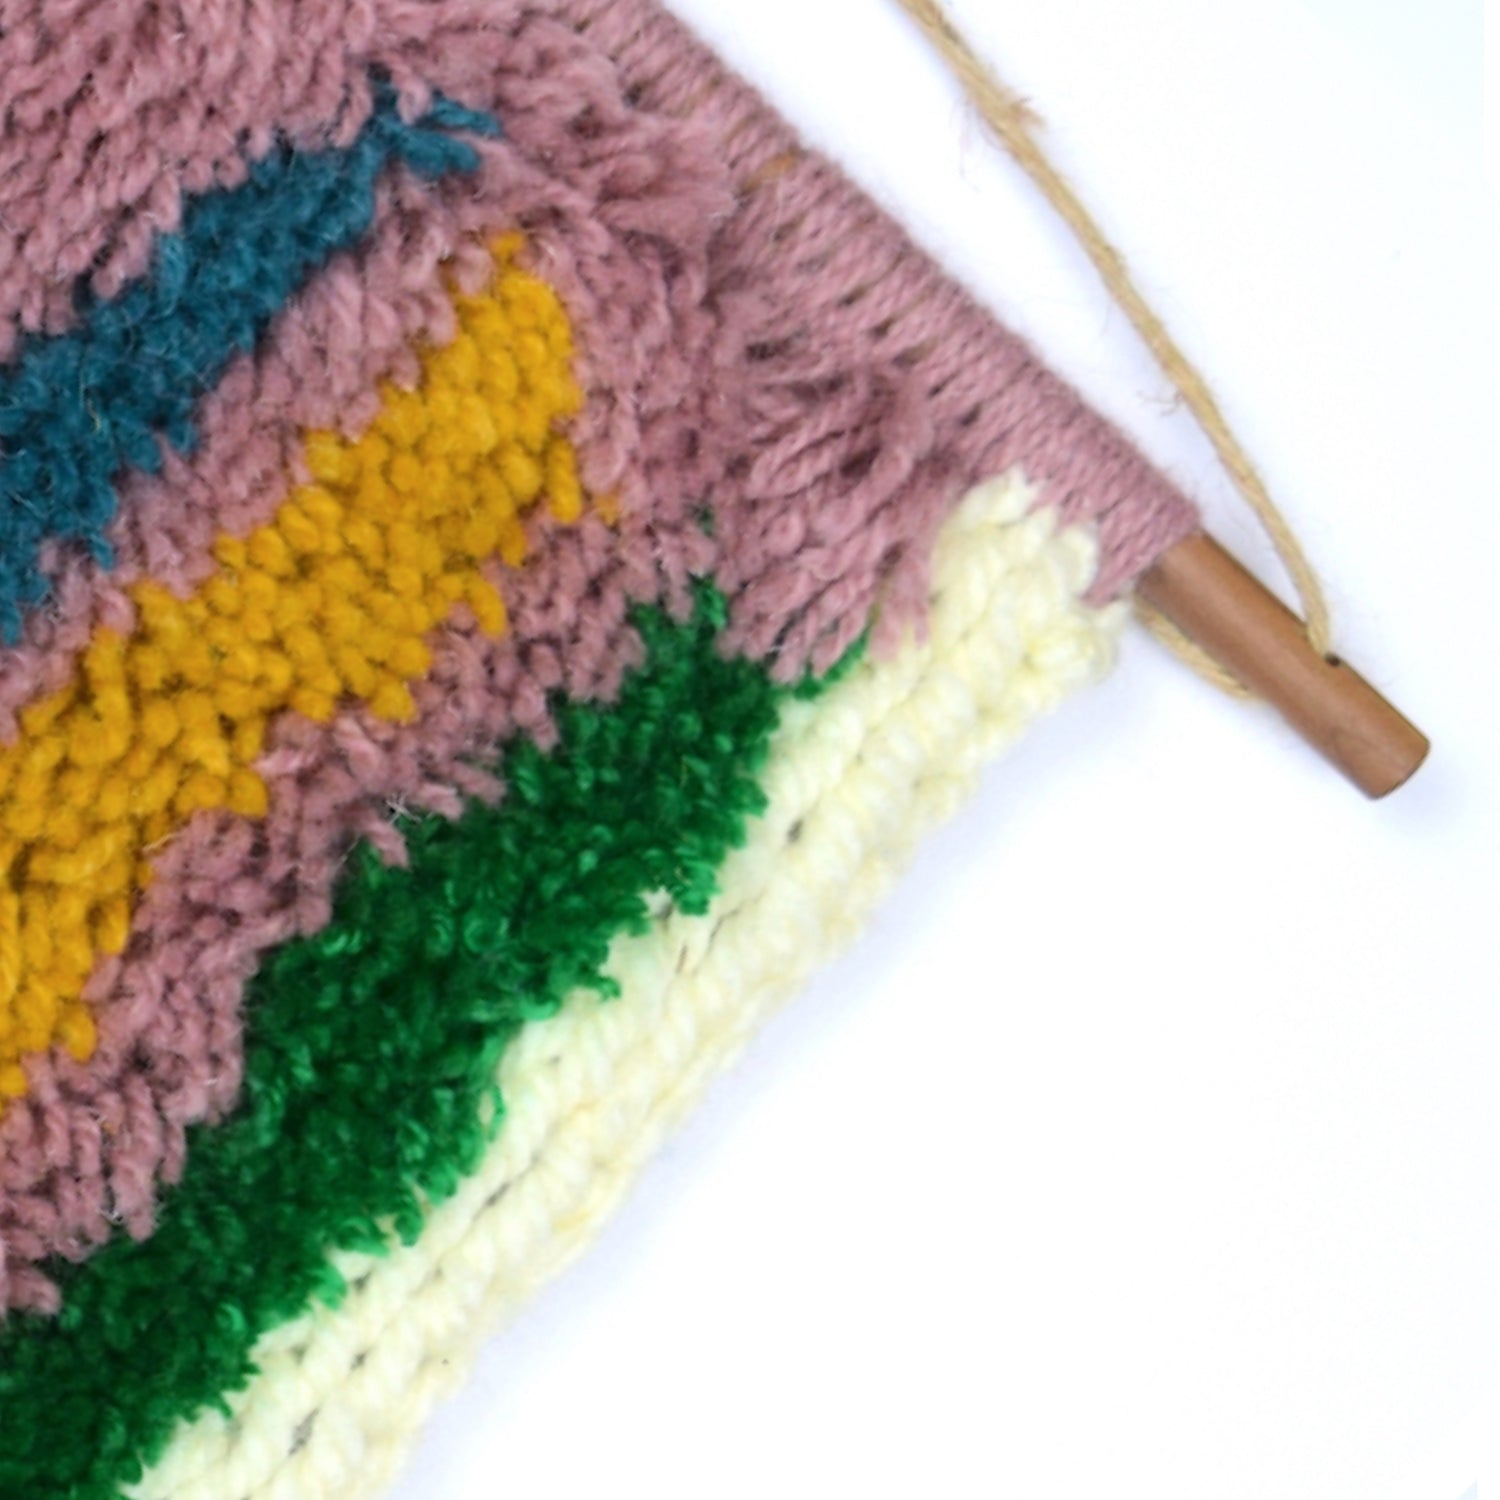 A contemporary hand latch hooked wall hanging, using a mixture of textures, latch hook, locker hook and punch needle with simple shapes and colour (lilac, aubergine, cream, blue, turquoise, mustard and green), showcasing Reclaimed Yarn and Yarn from previous projects. Close up.